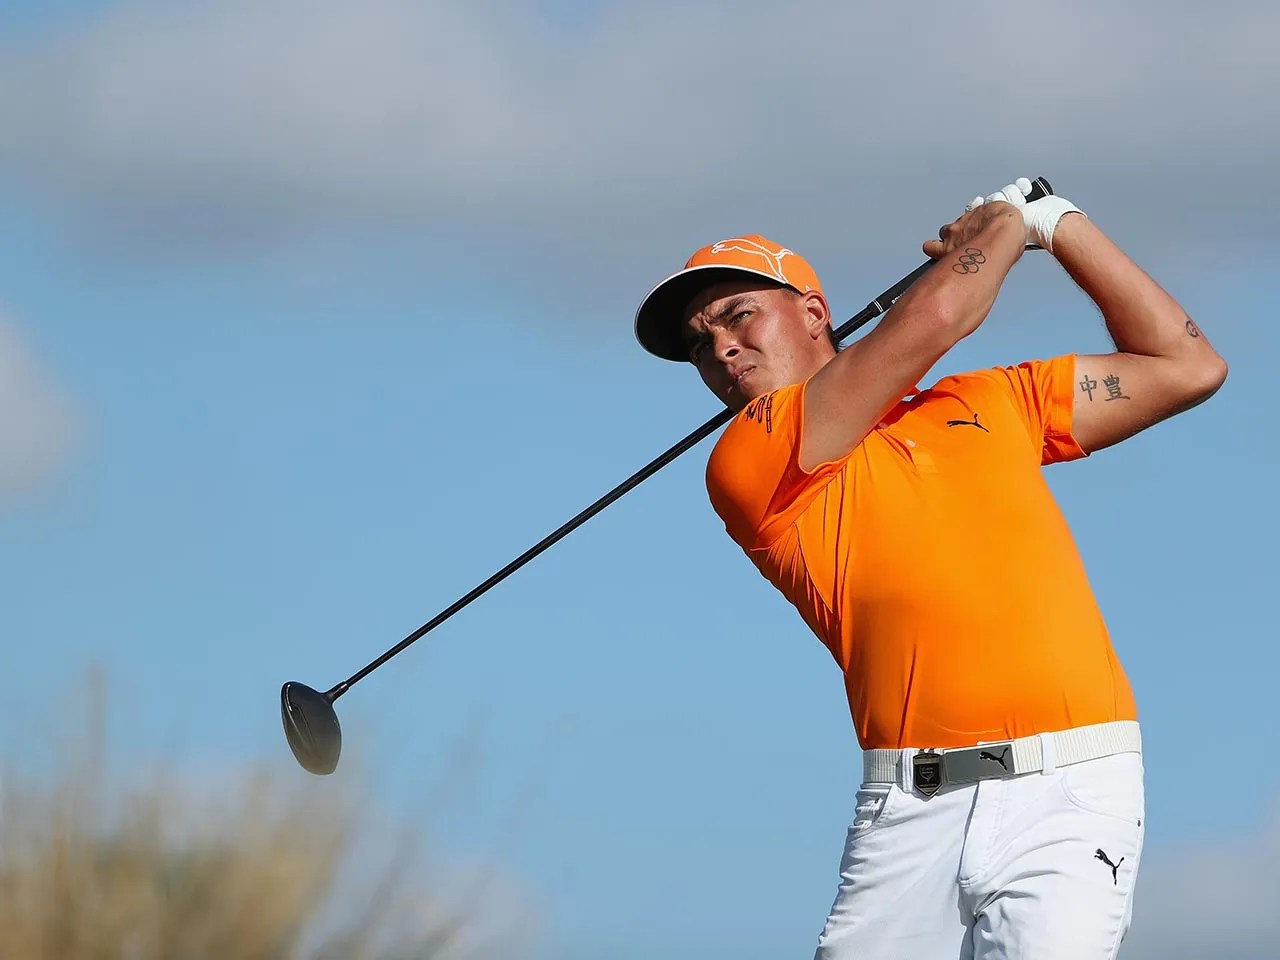 PGA star Rickie Fowler sells Florida waterfront home for 2.9M